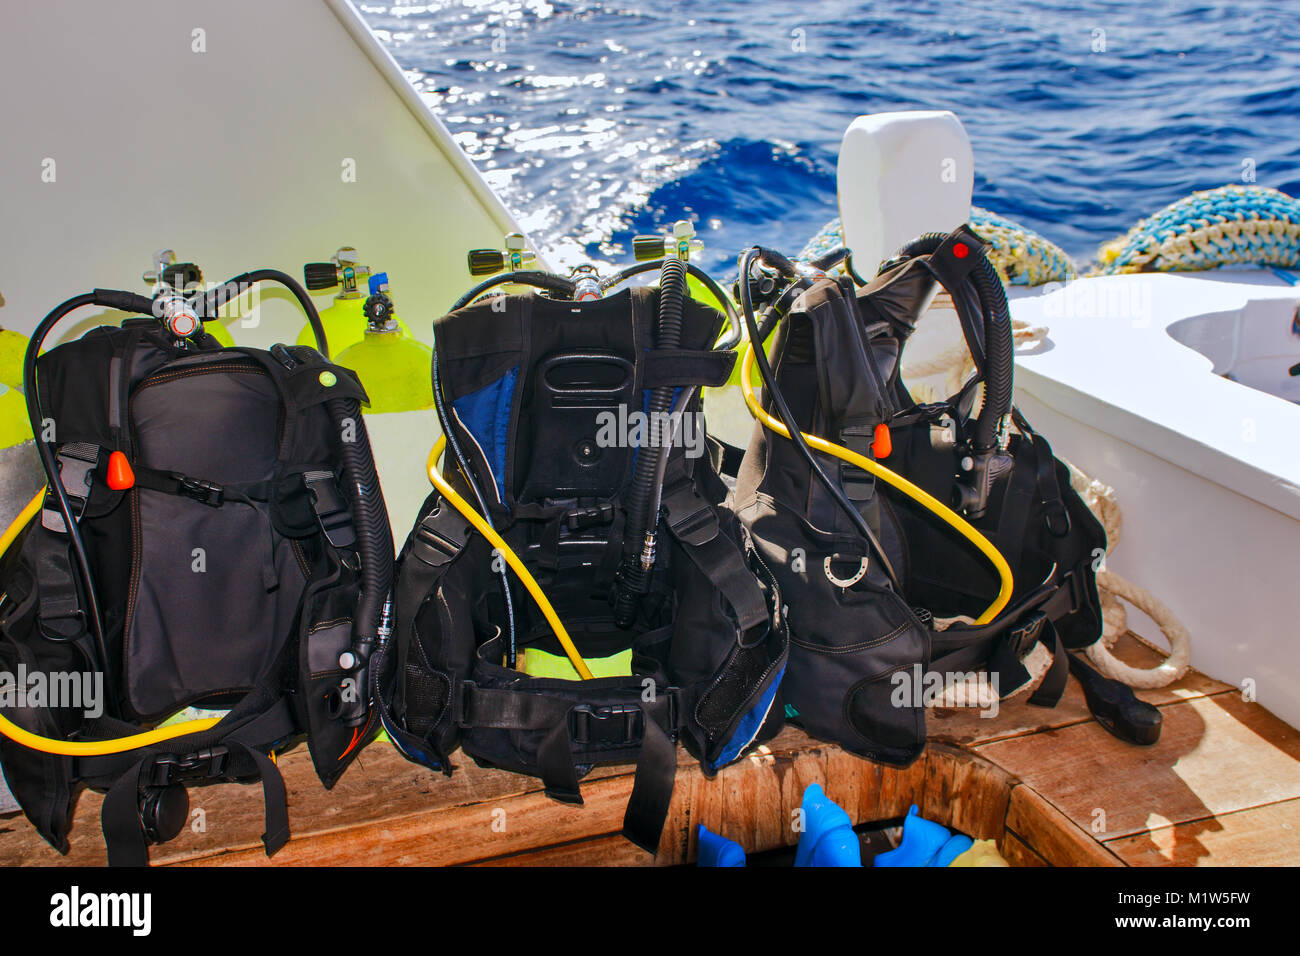 Equipment for scuba diving on boat of ship. Stock Photo